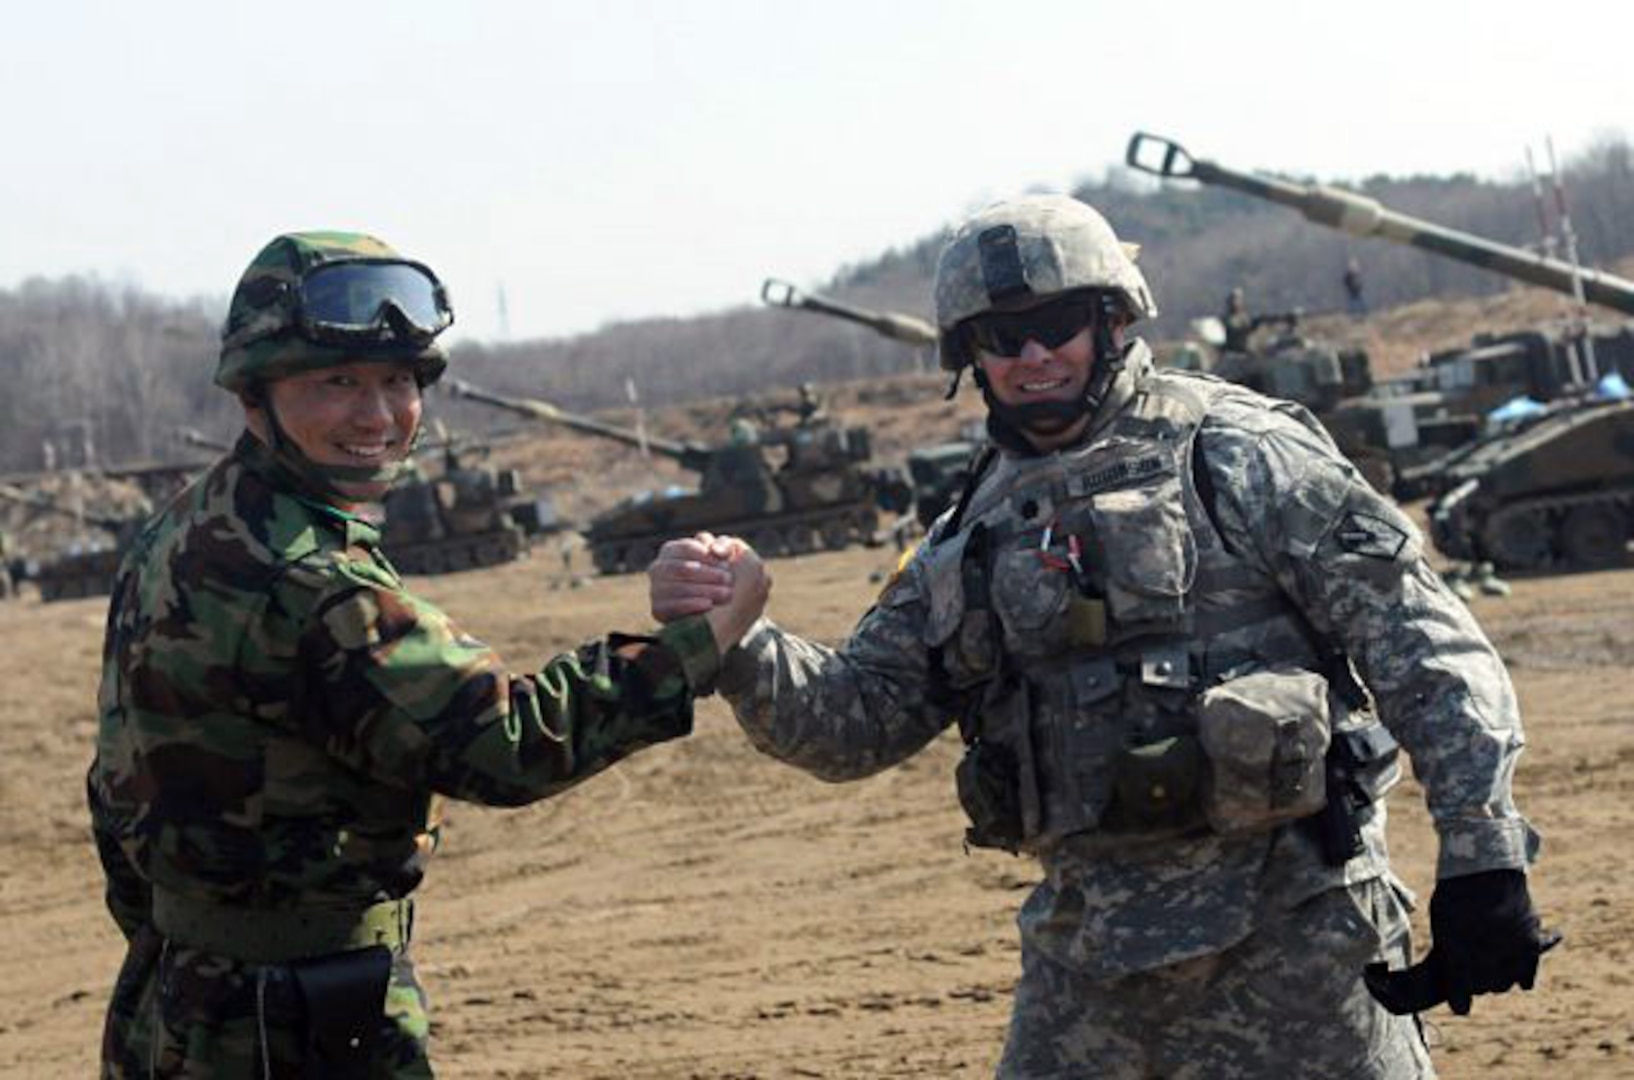 Members of the Utah National Guard's 145th Artillery Battalion, and the Republic of Korea Army's 628th Artillery Battalion, show the level of mutual respect they have for one another during an artillery live-fire exercise at the Rodriguez Live-Fire Complex in South Korea, March 15, 2012.